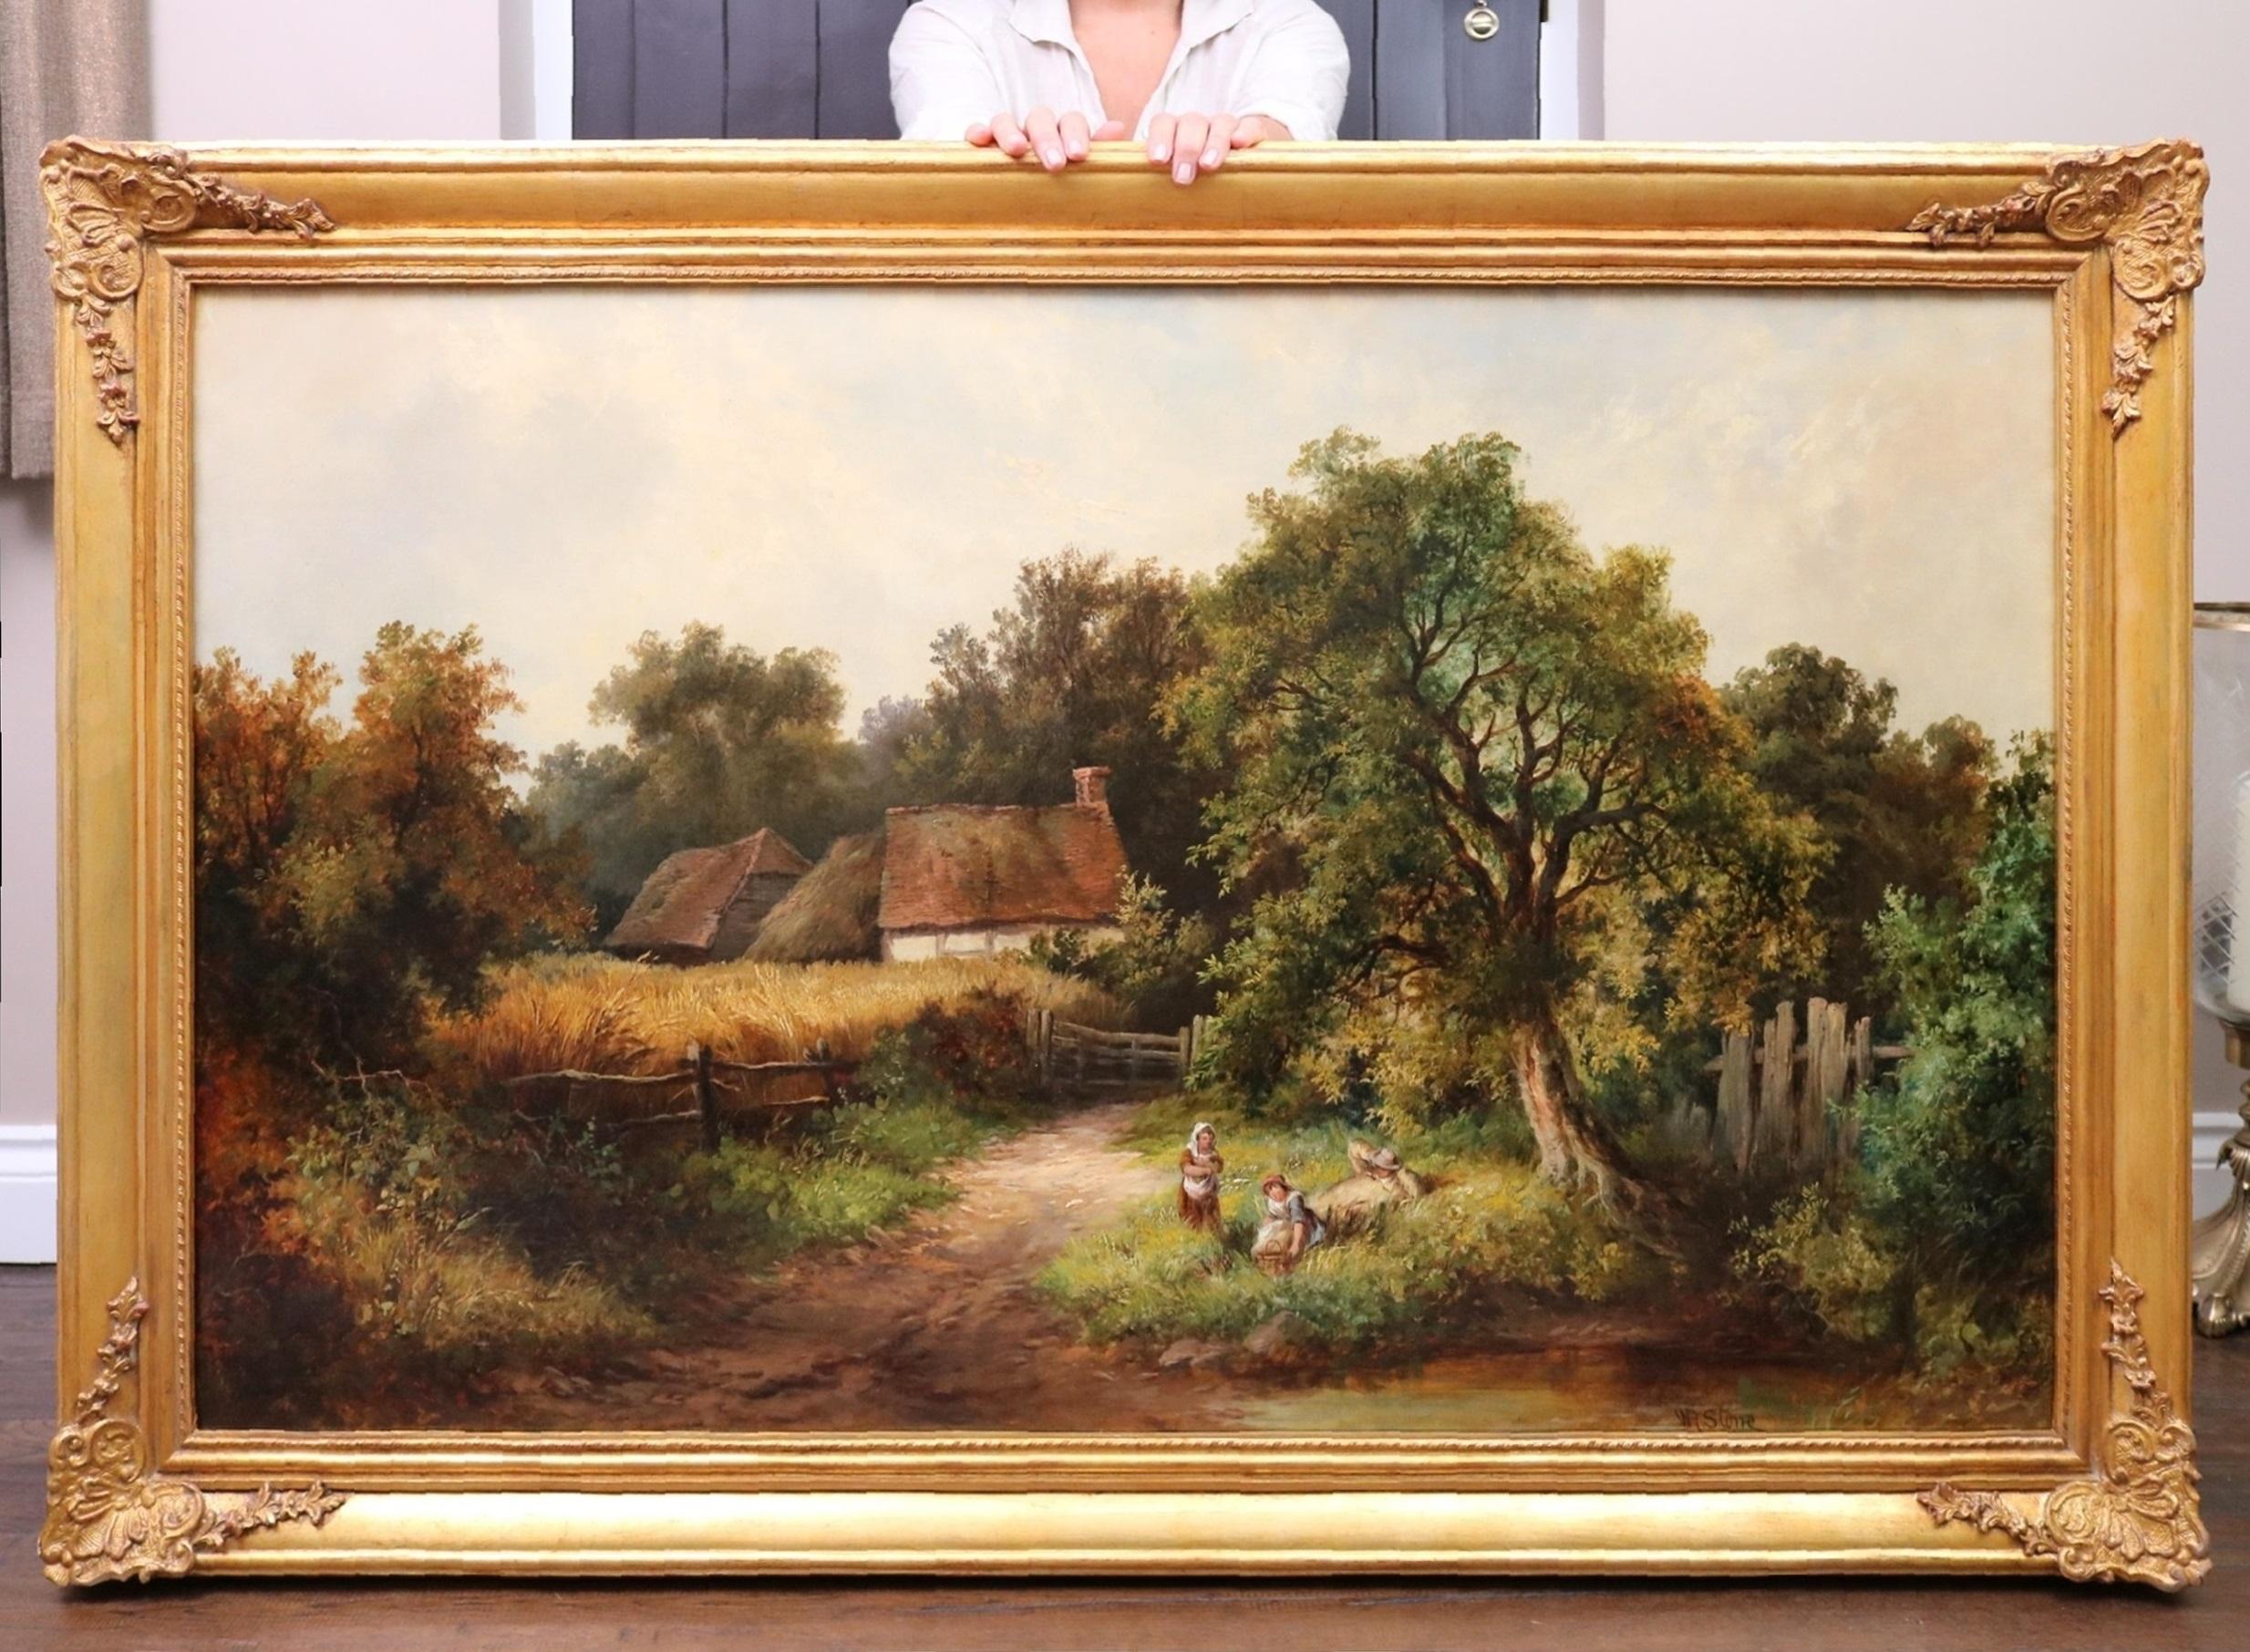 William Richard Stone Landscape Painting - A Kentish Homestead - Large 19th Century English Country Landscape Oil Painting 